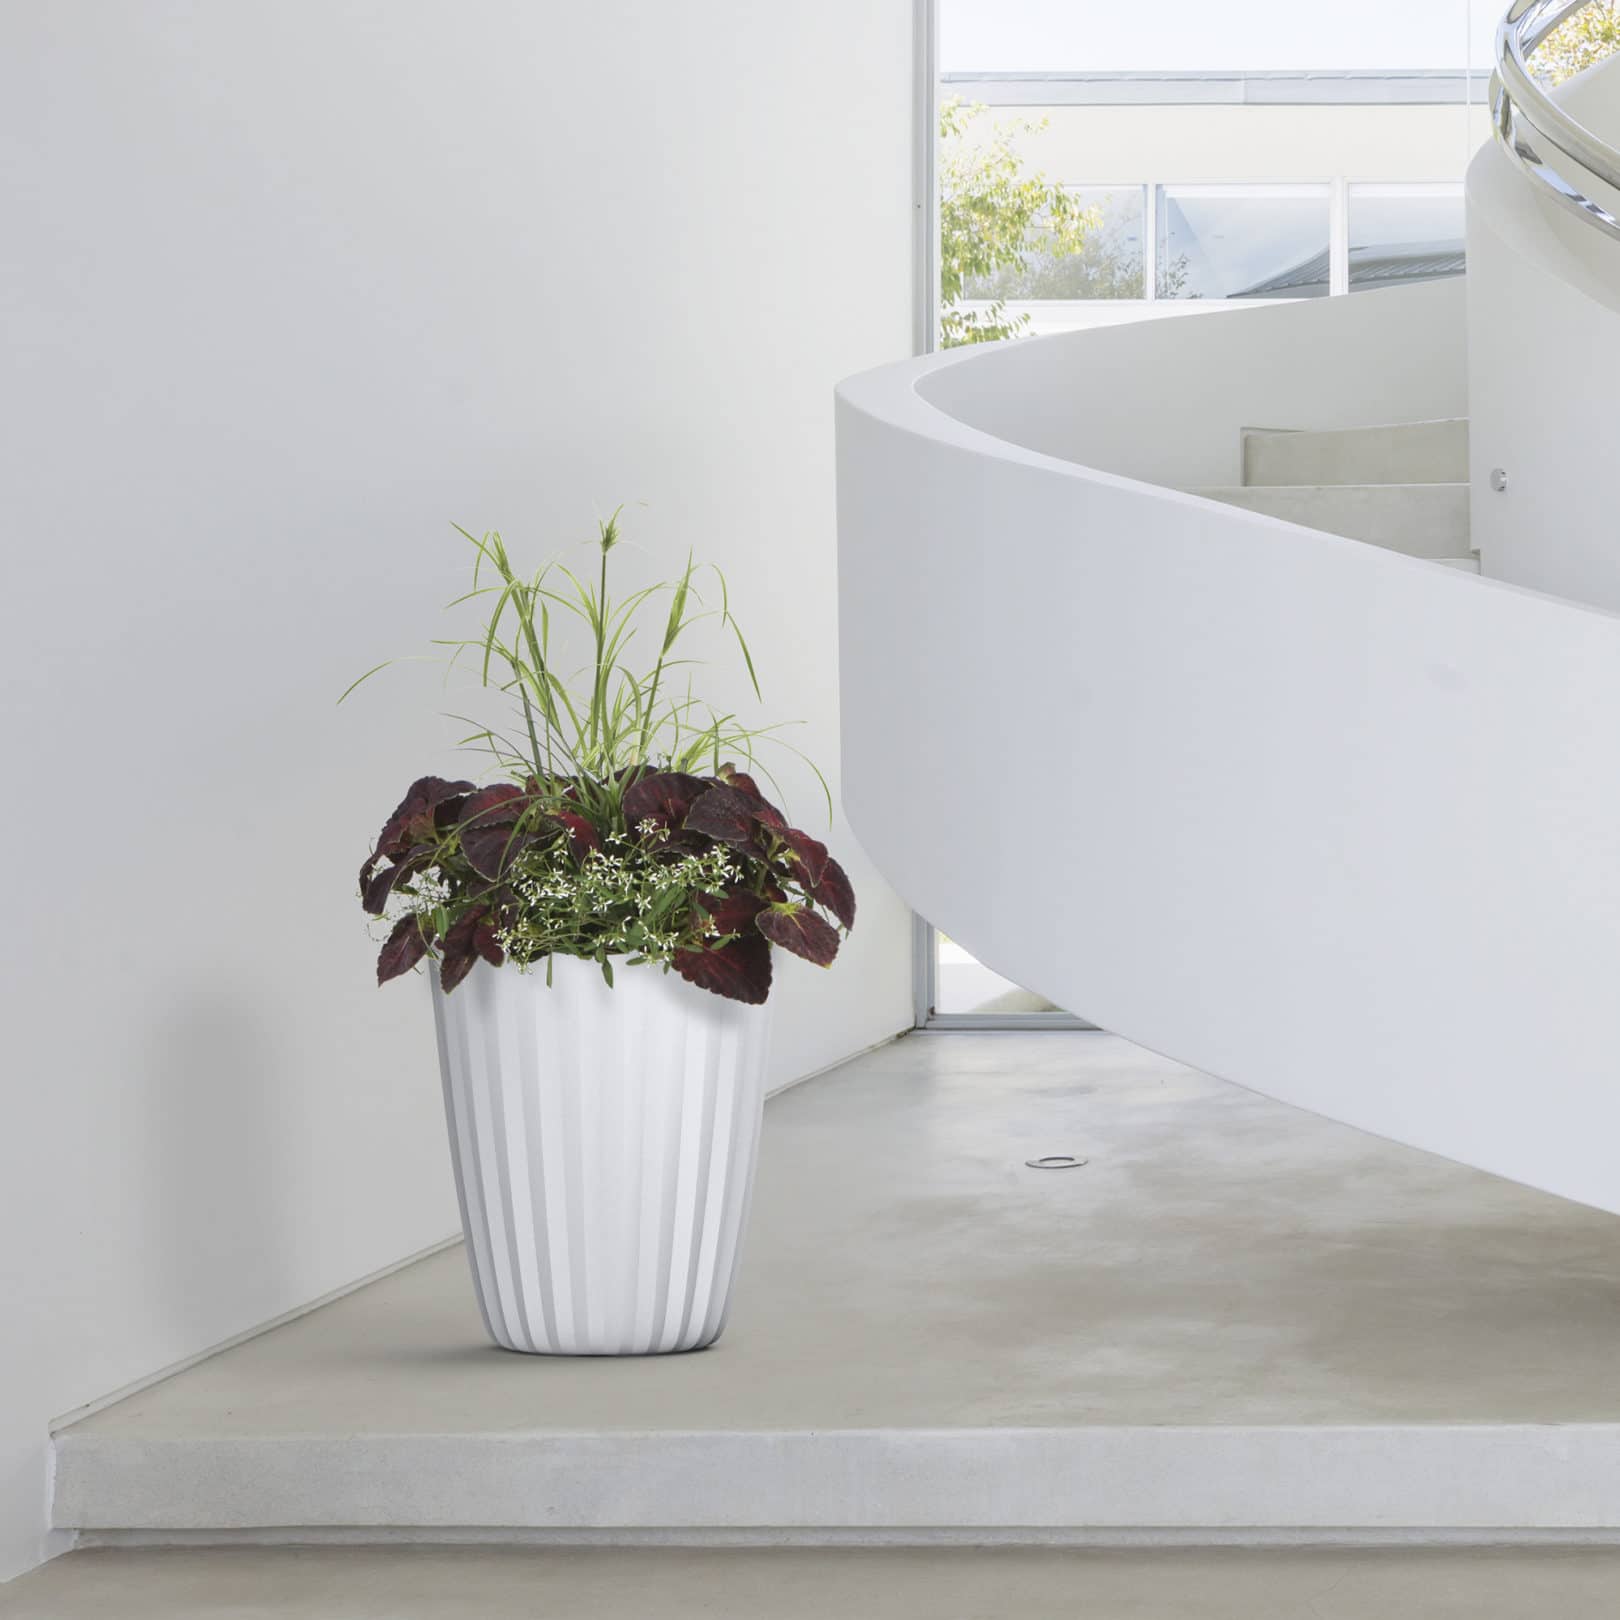 Curving Stairwell with Pleat Planter